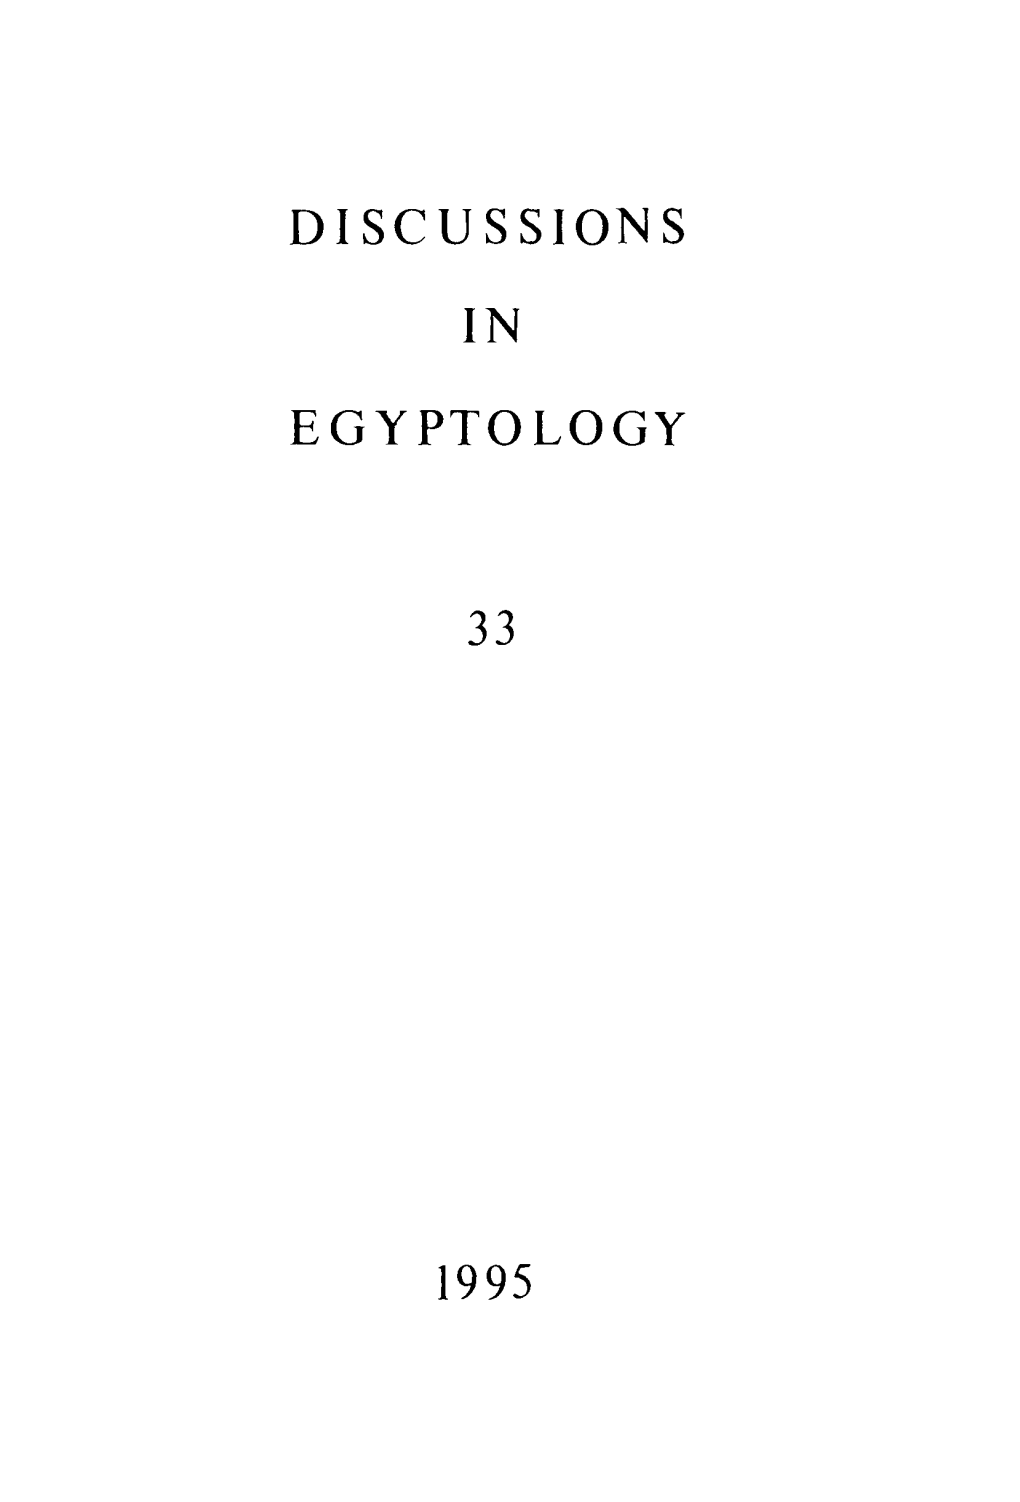 Discussions in Egyptology 33, 1995